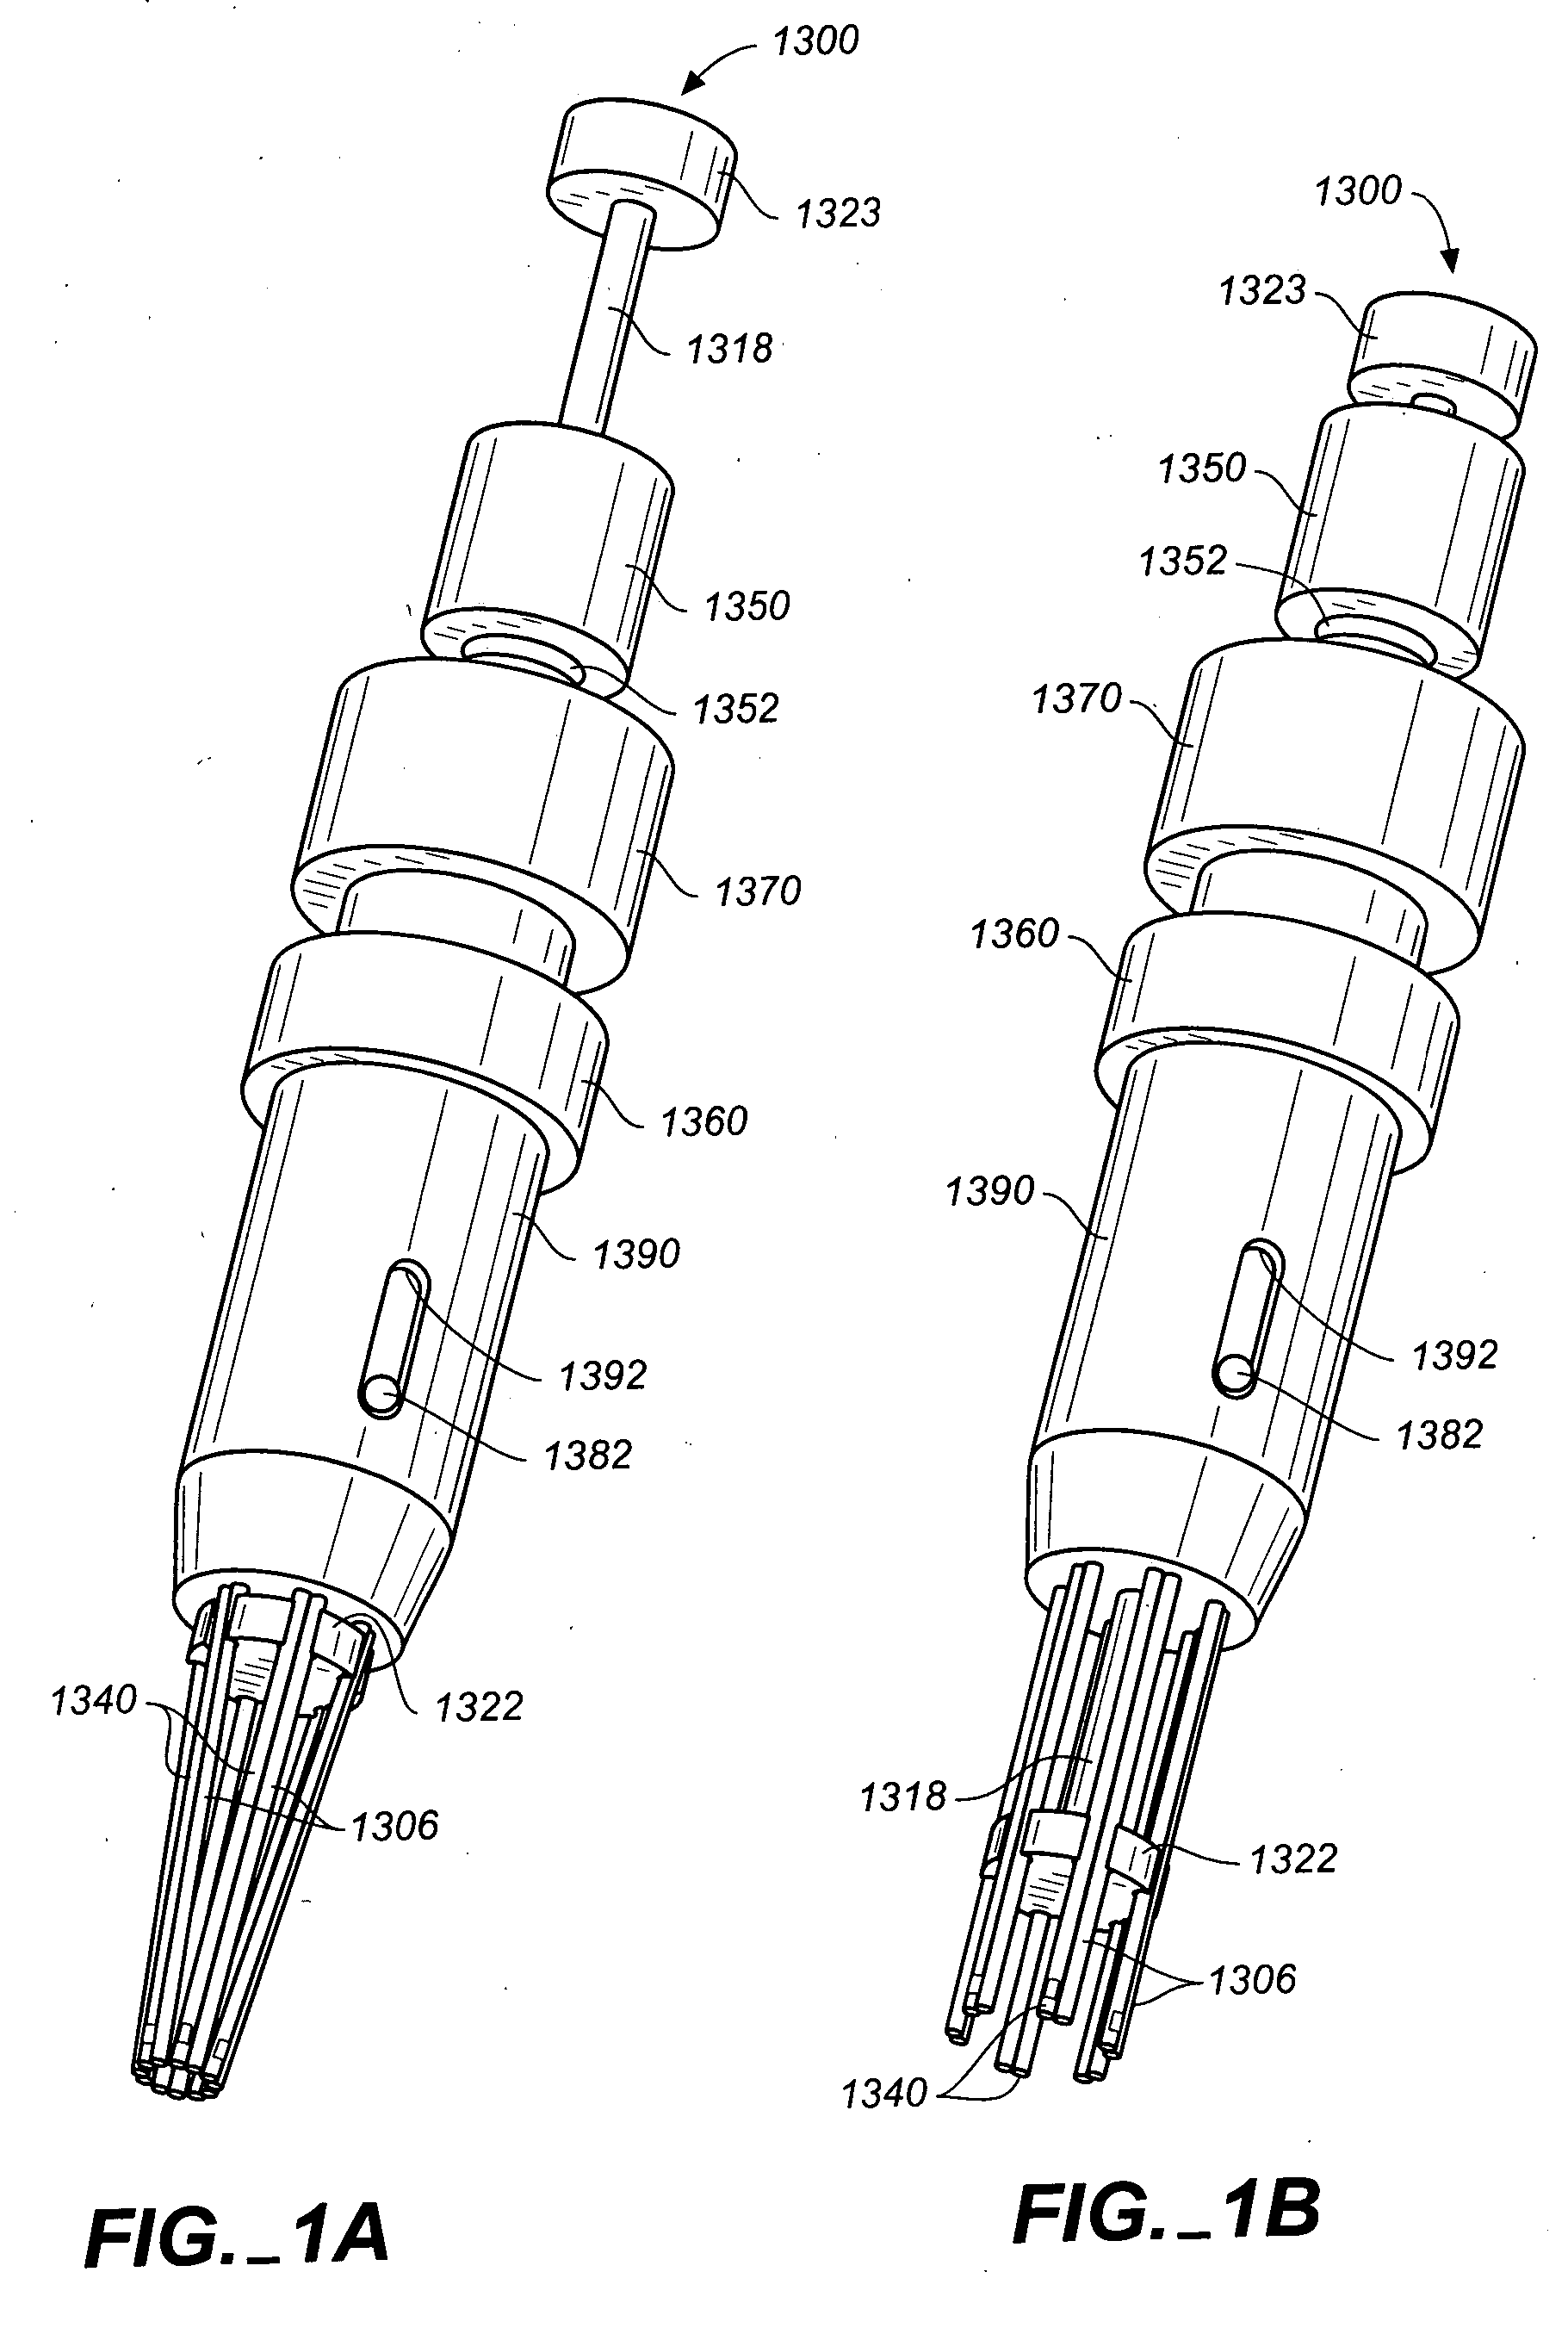 Surgical connection apparatus and methods